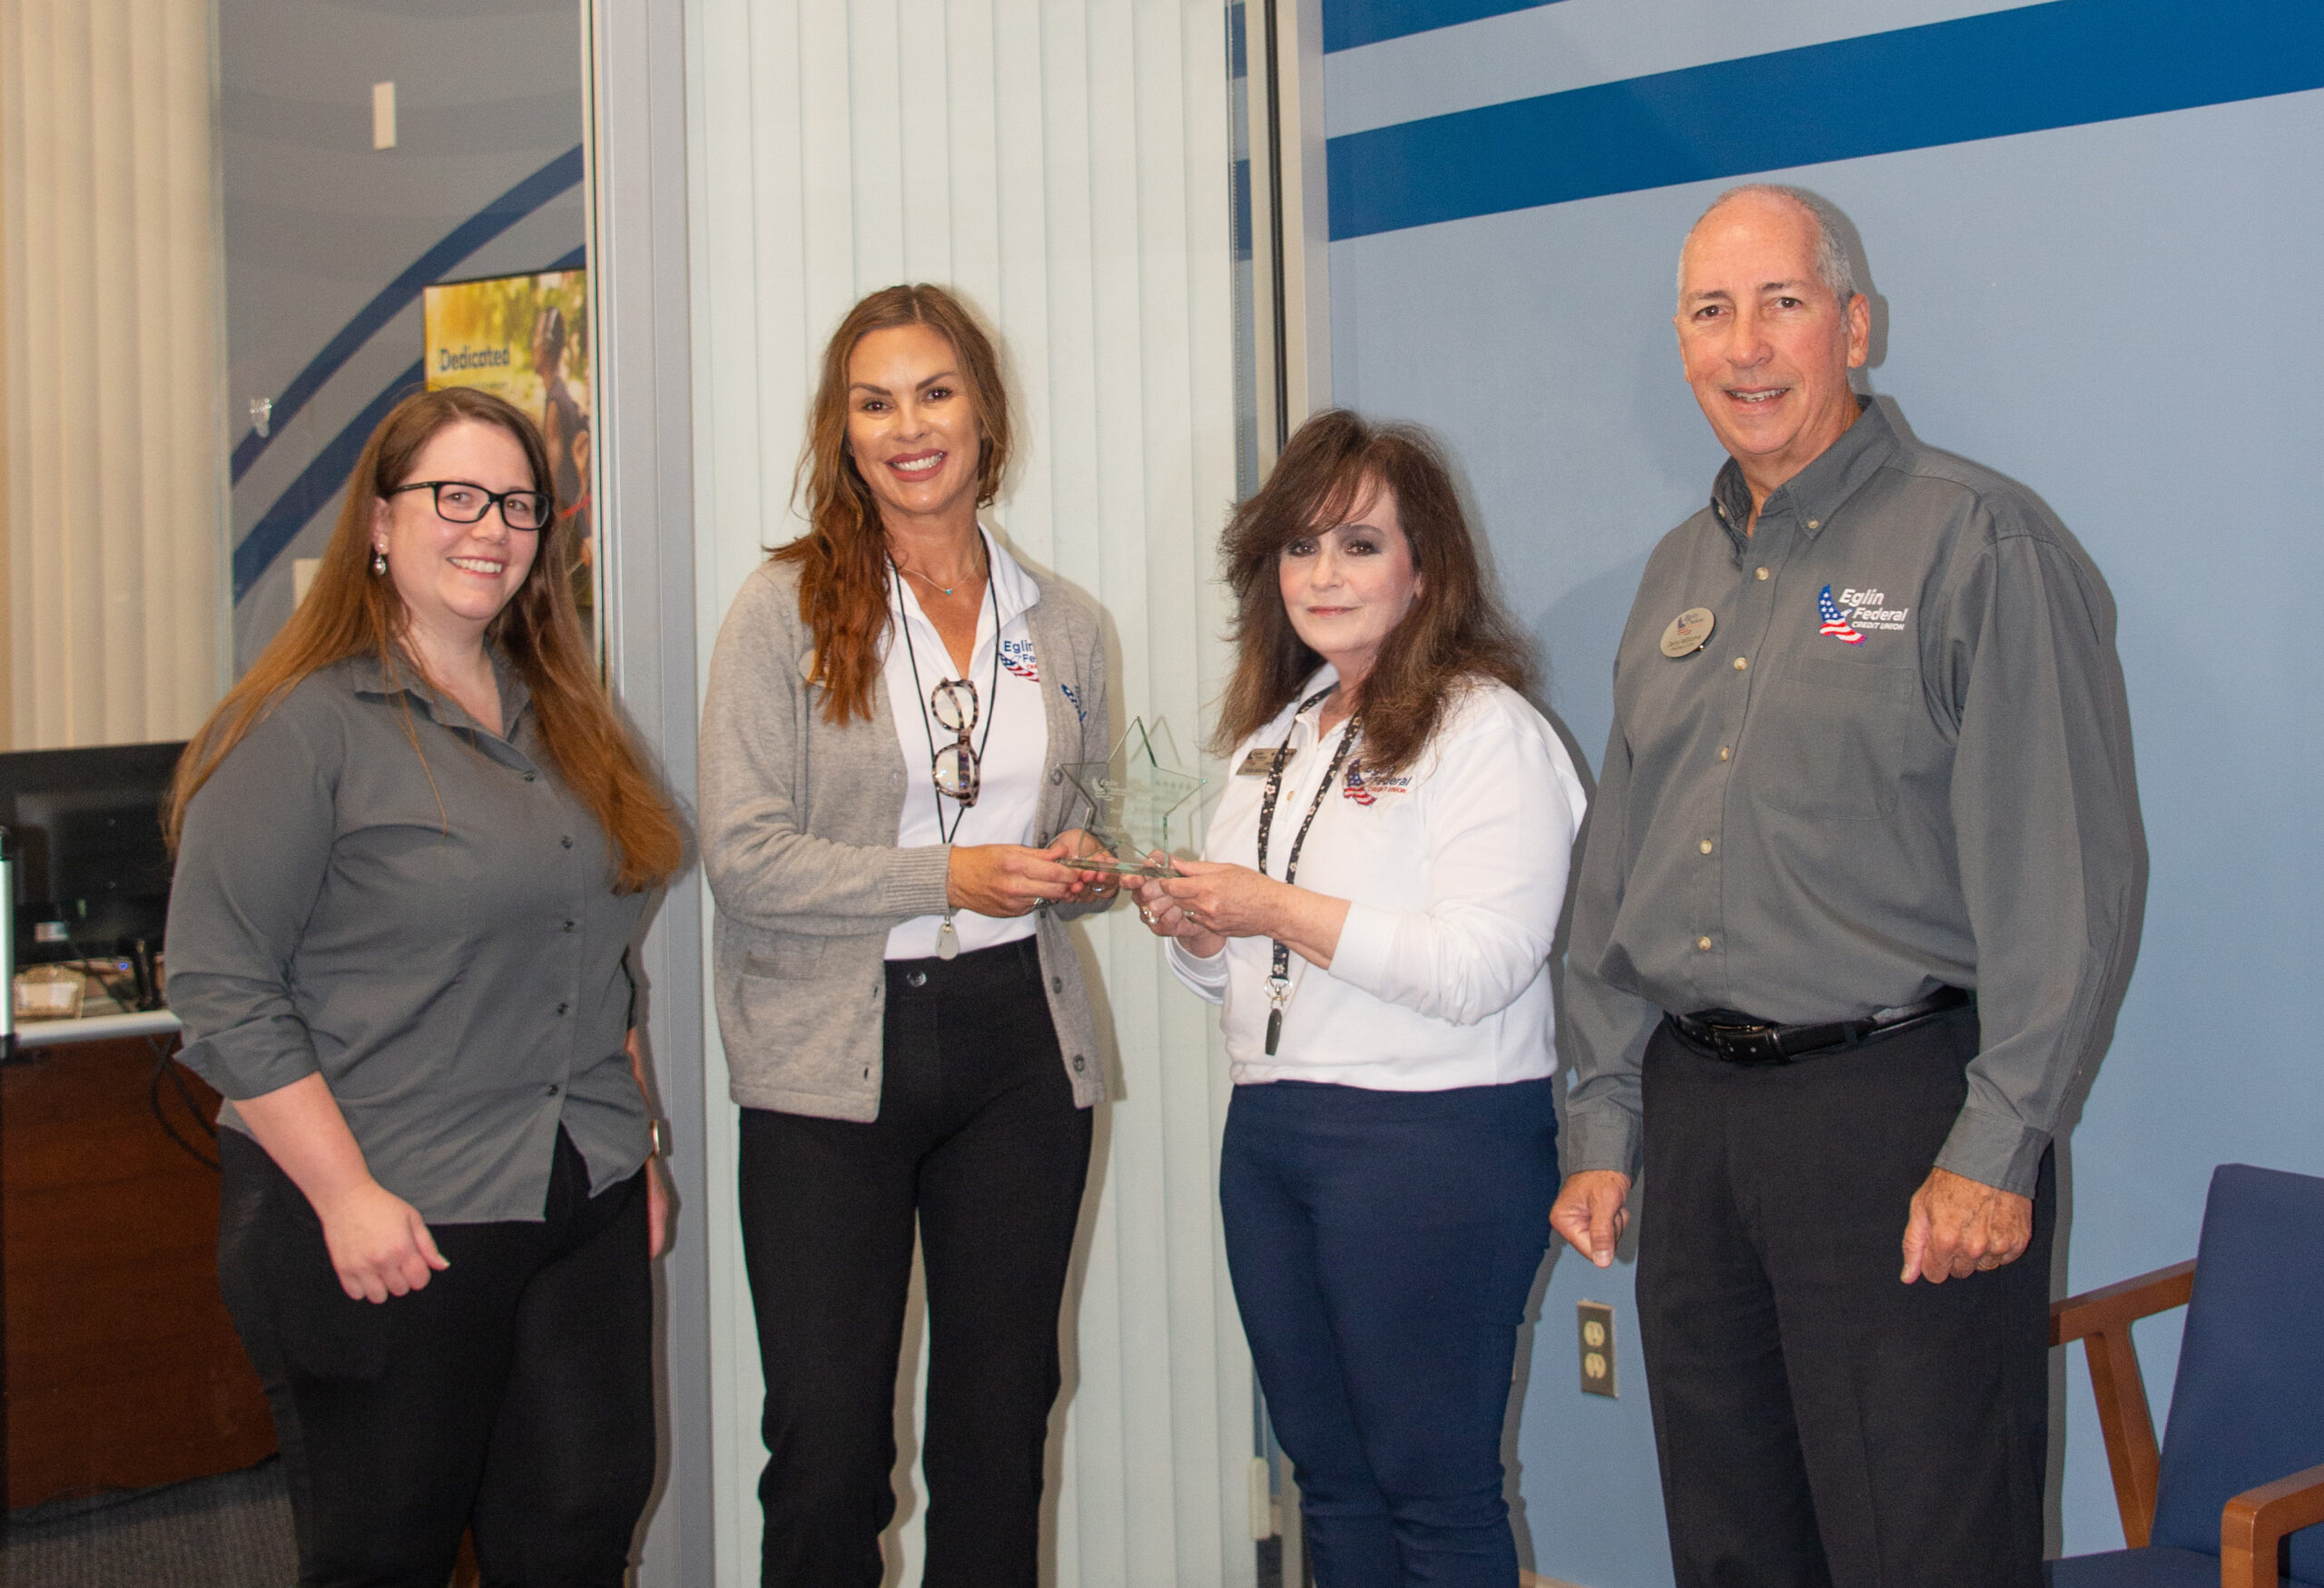 Teri Broxson Receives Eglin Federal Credit Union’s 5-star Employee Award for the 2nd Quarter